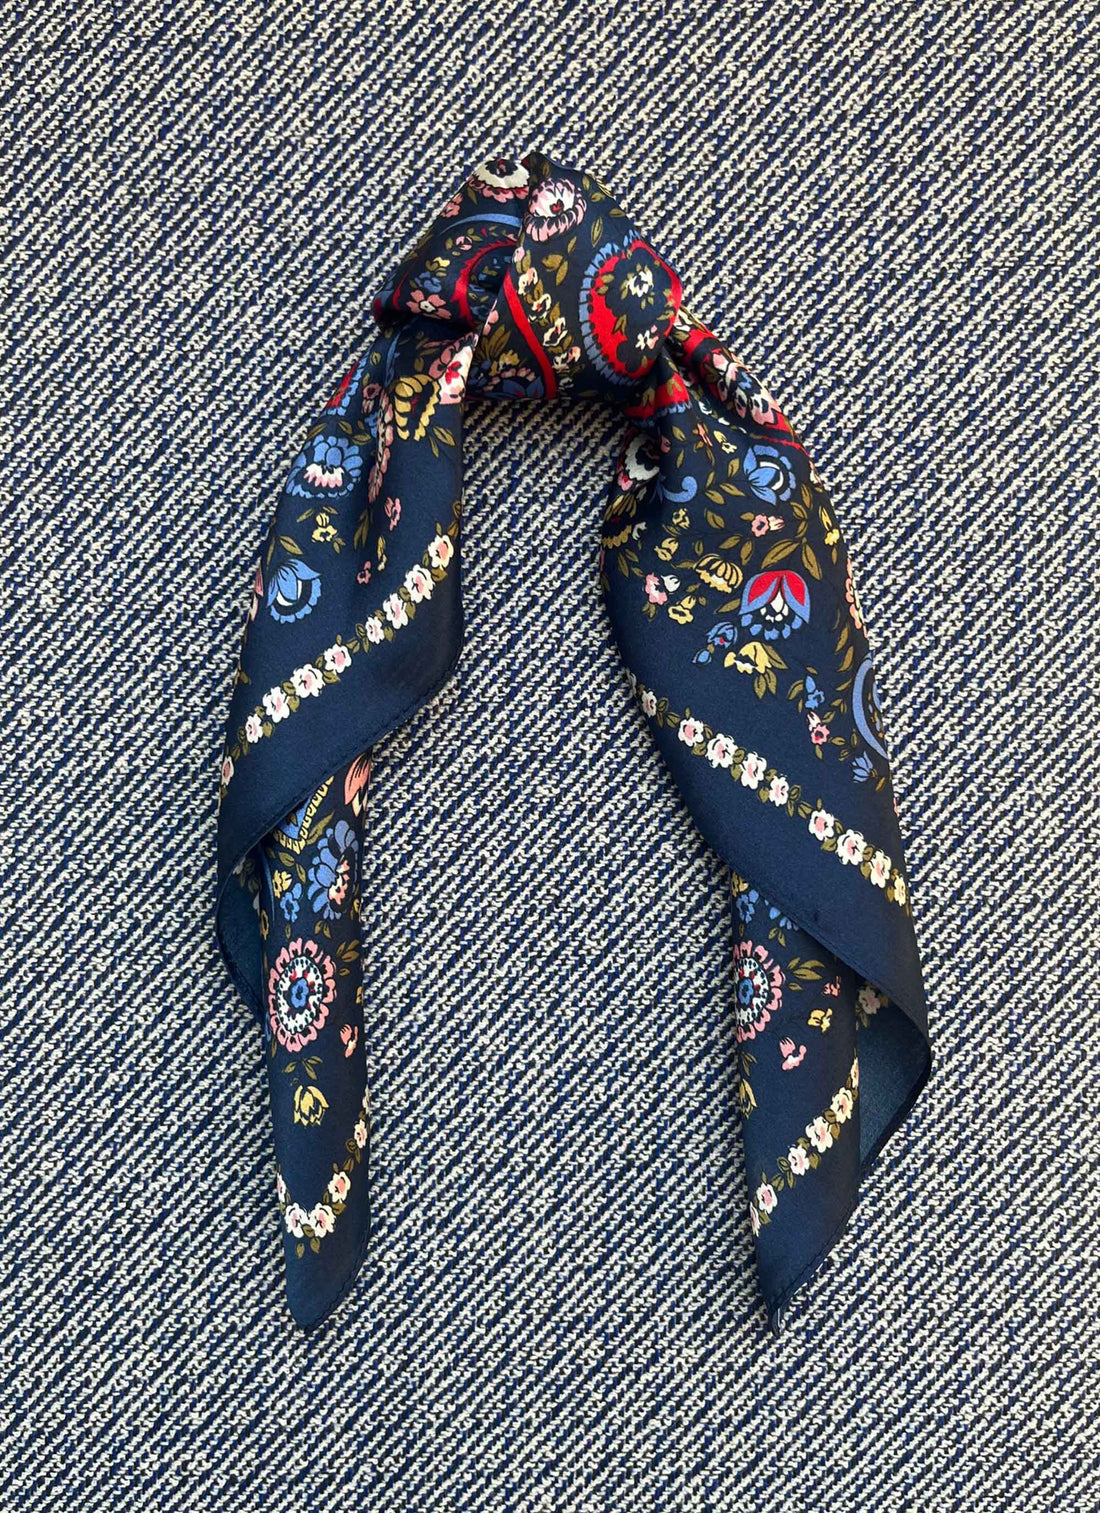 Silk scarf navy/red/rose paisley